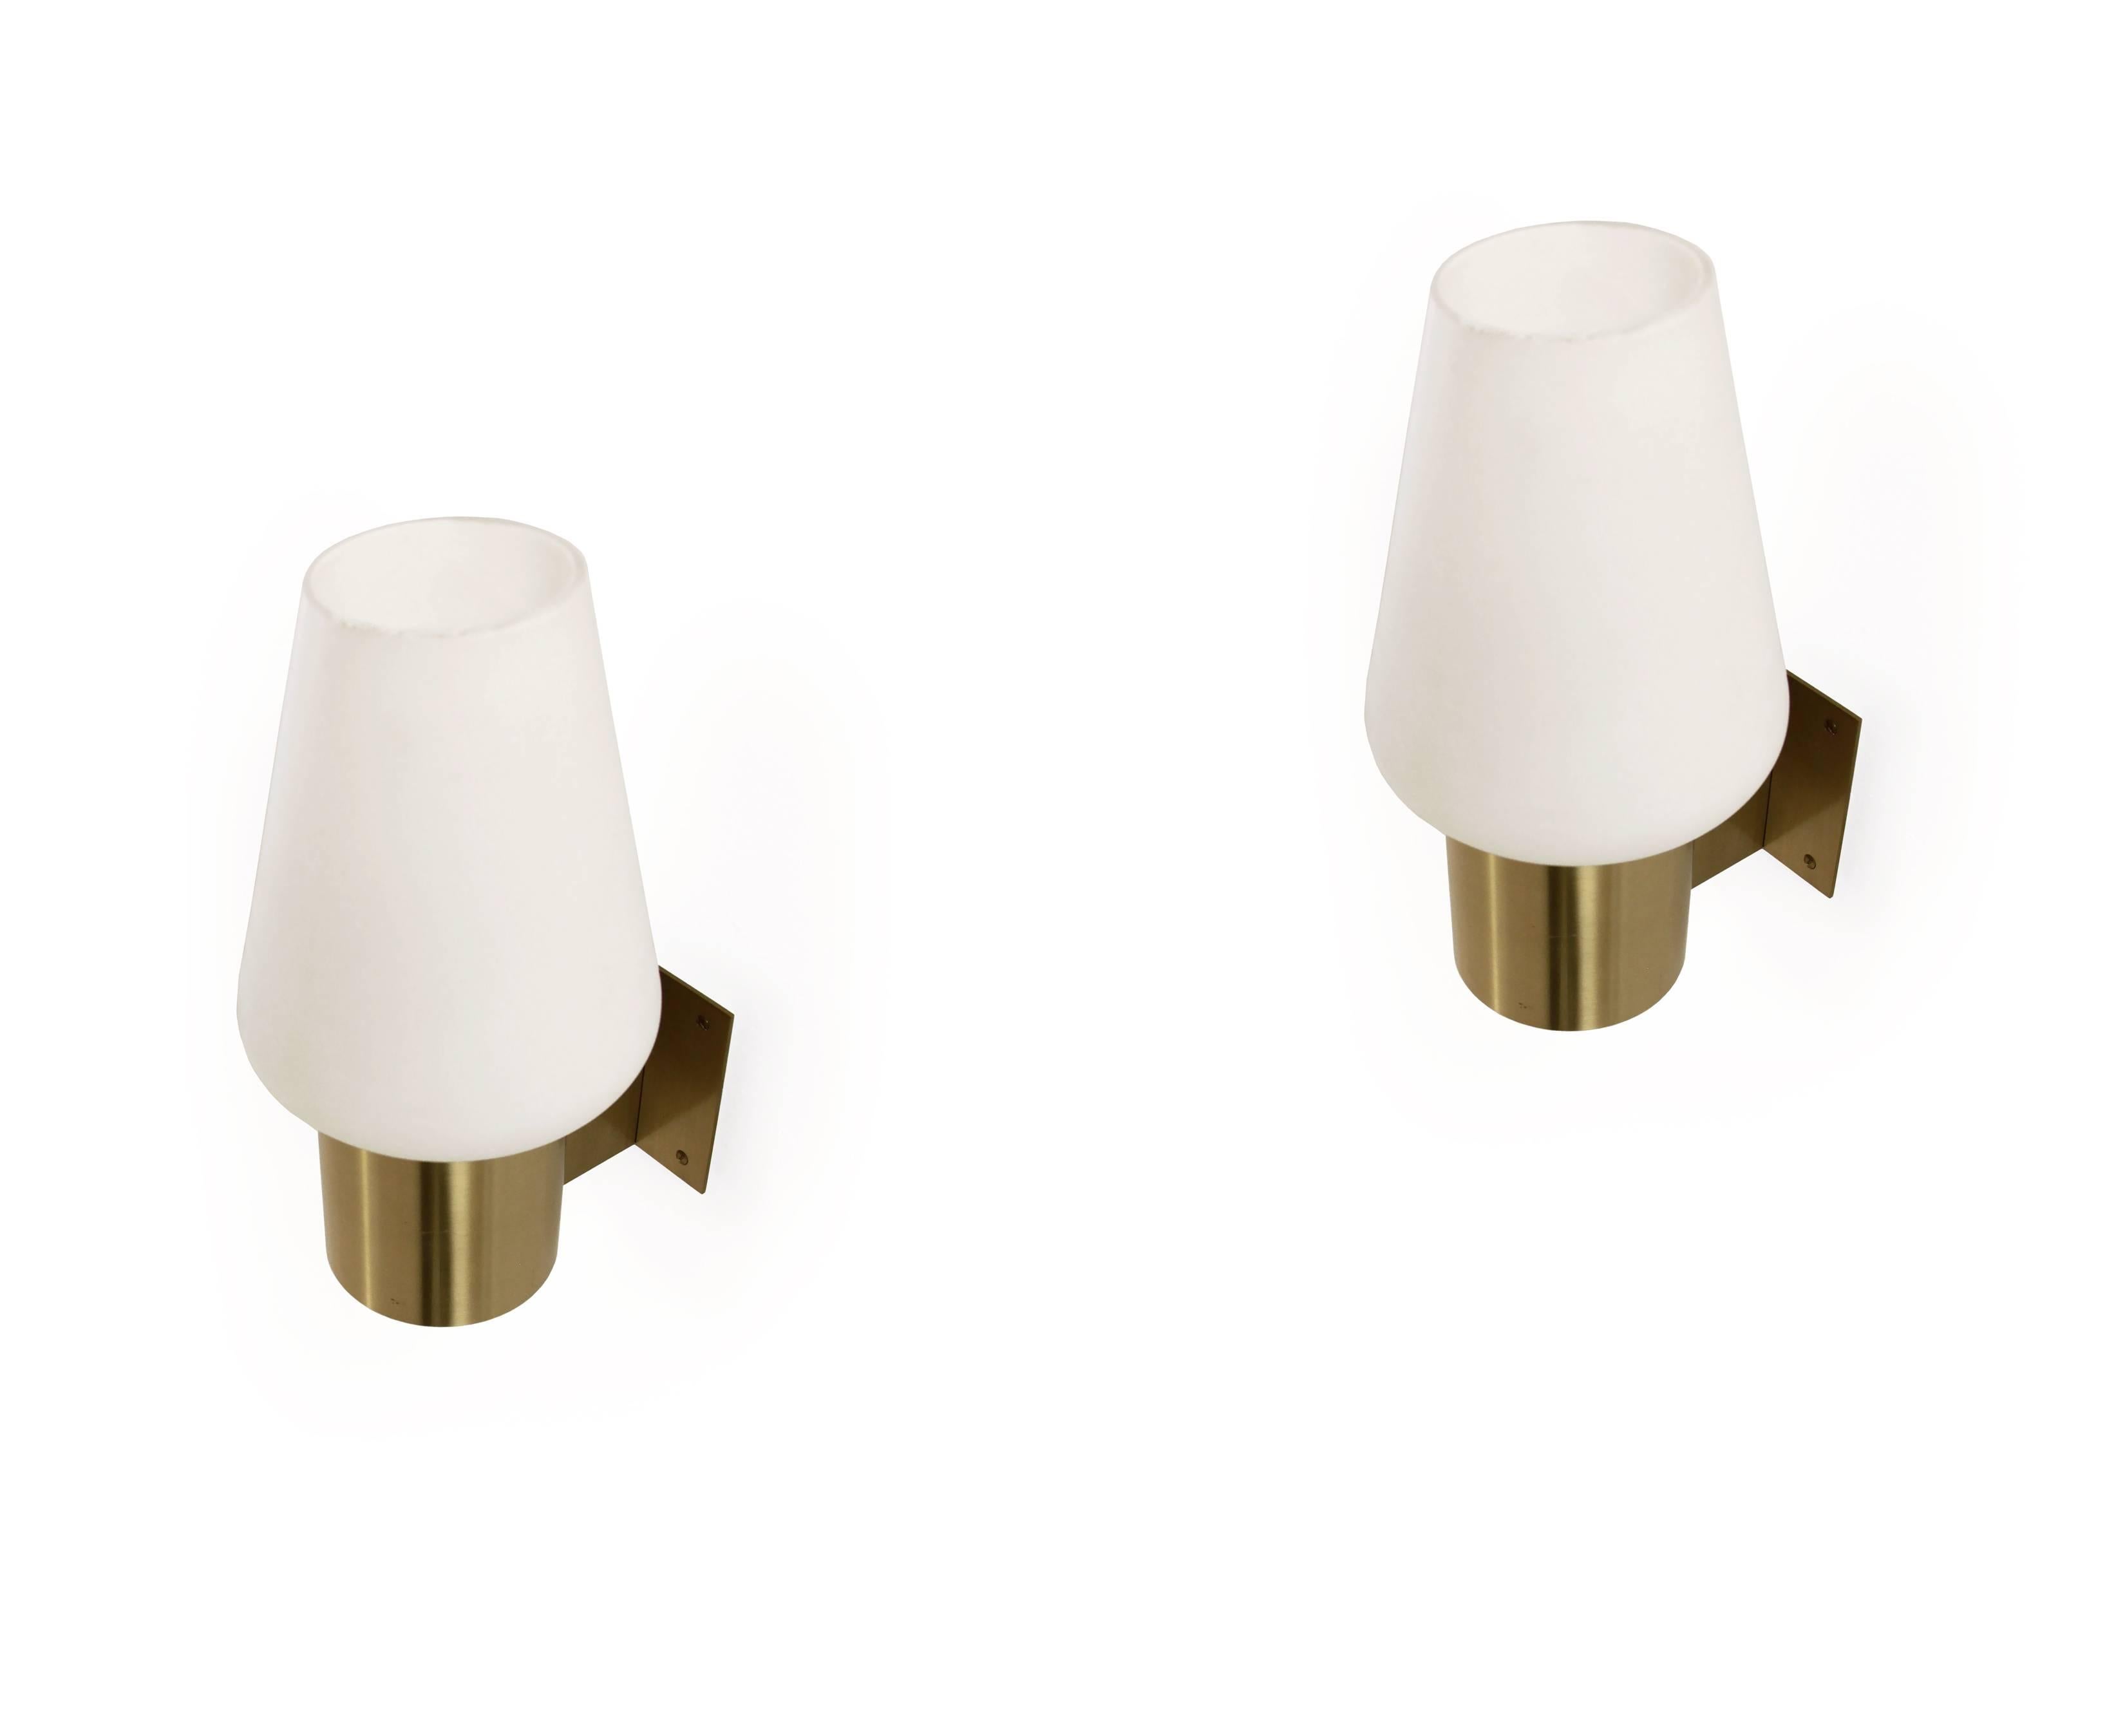 Classic and sublime pair of wall lamps in brass with shades in opaline glass. Designed and made in Denmark by Fog & Mørup from circa 1960s second half. Both lamps are fully working and in very good vintage condition.